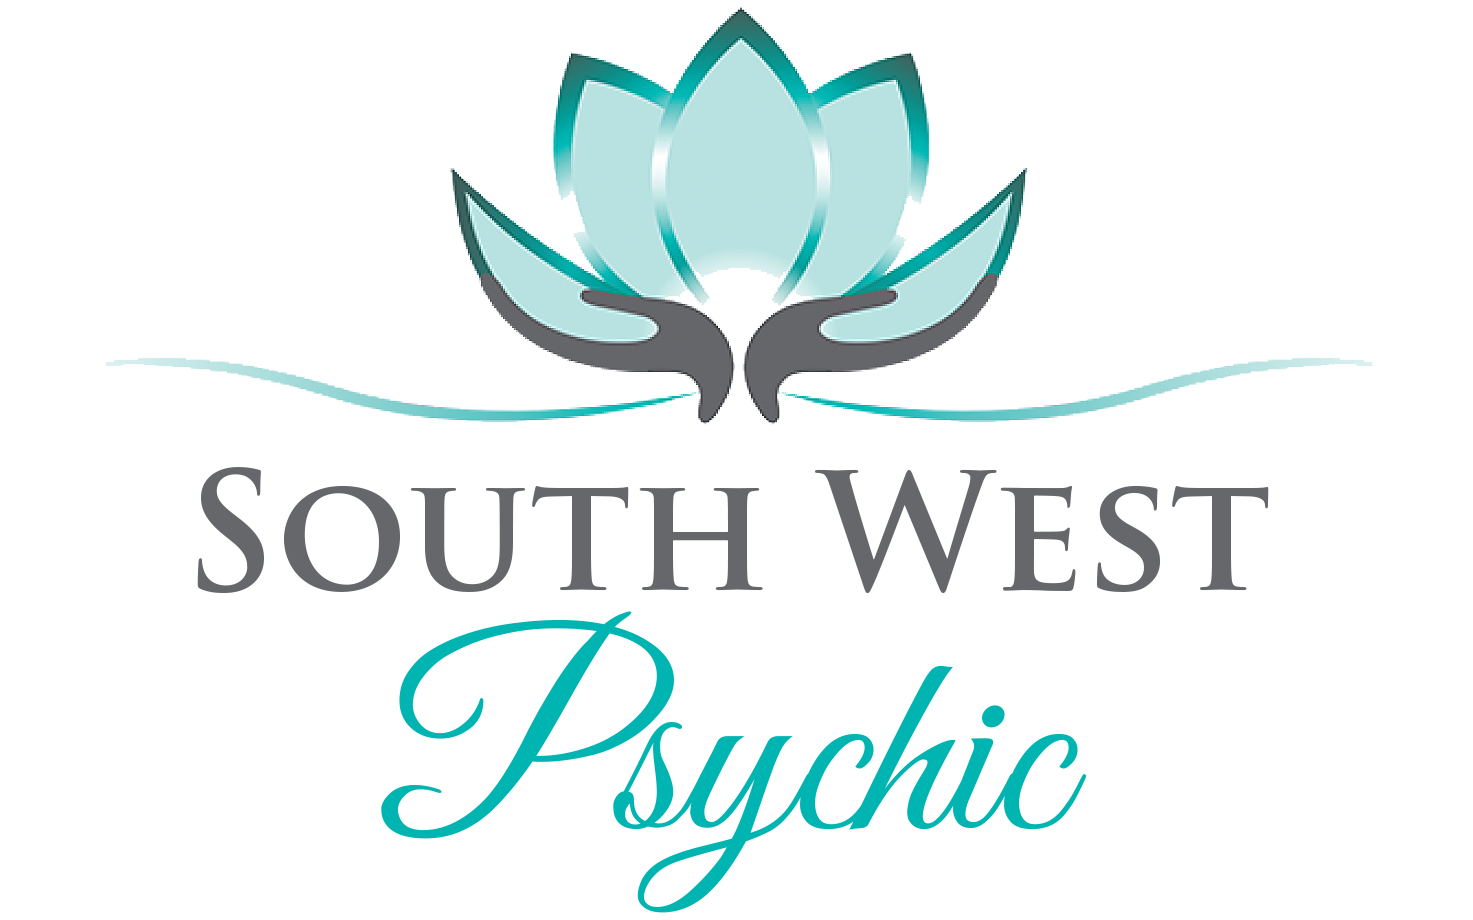 South West Psychic